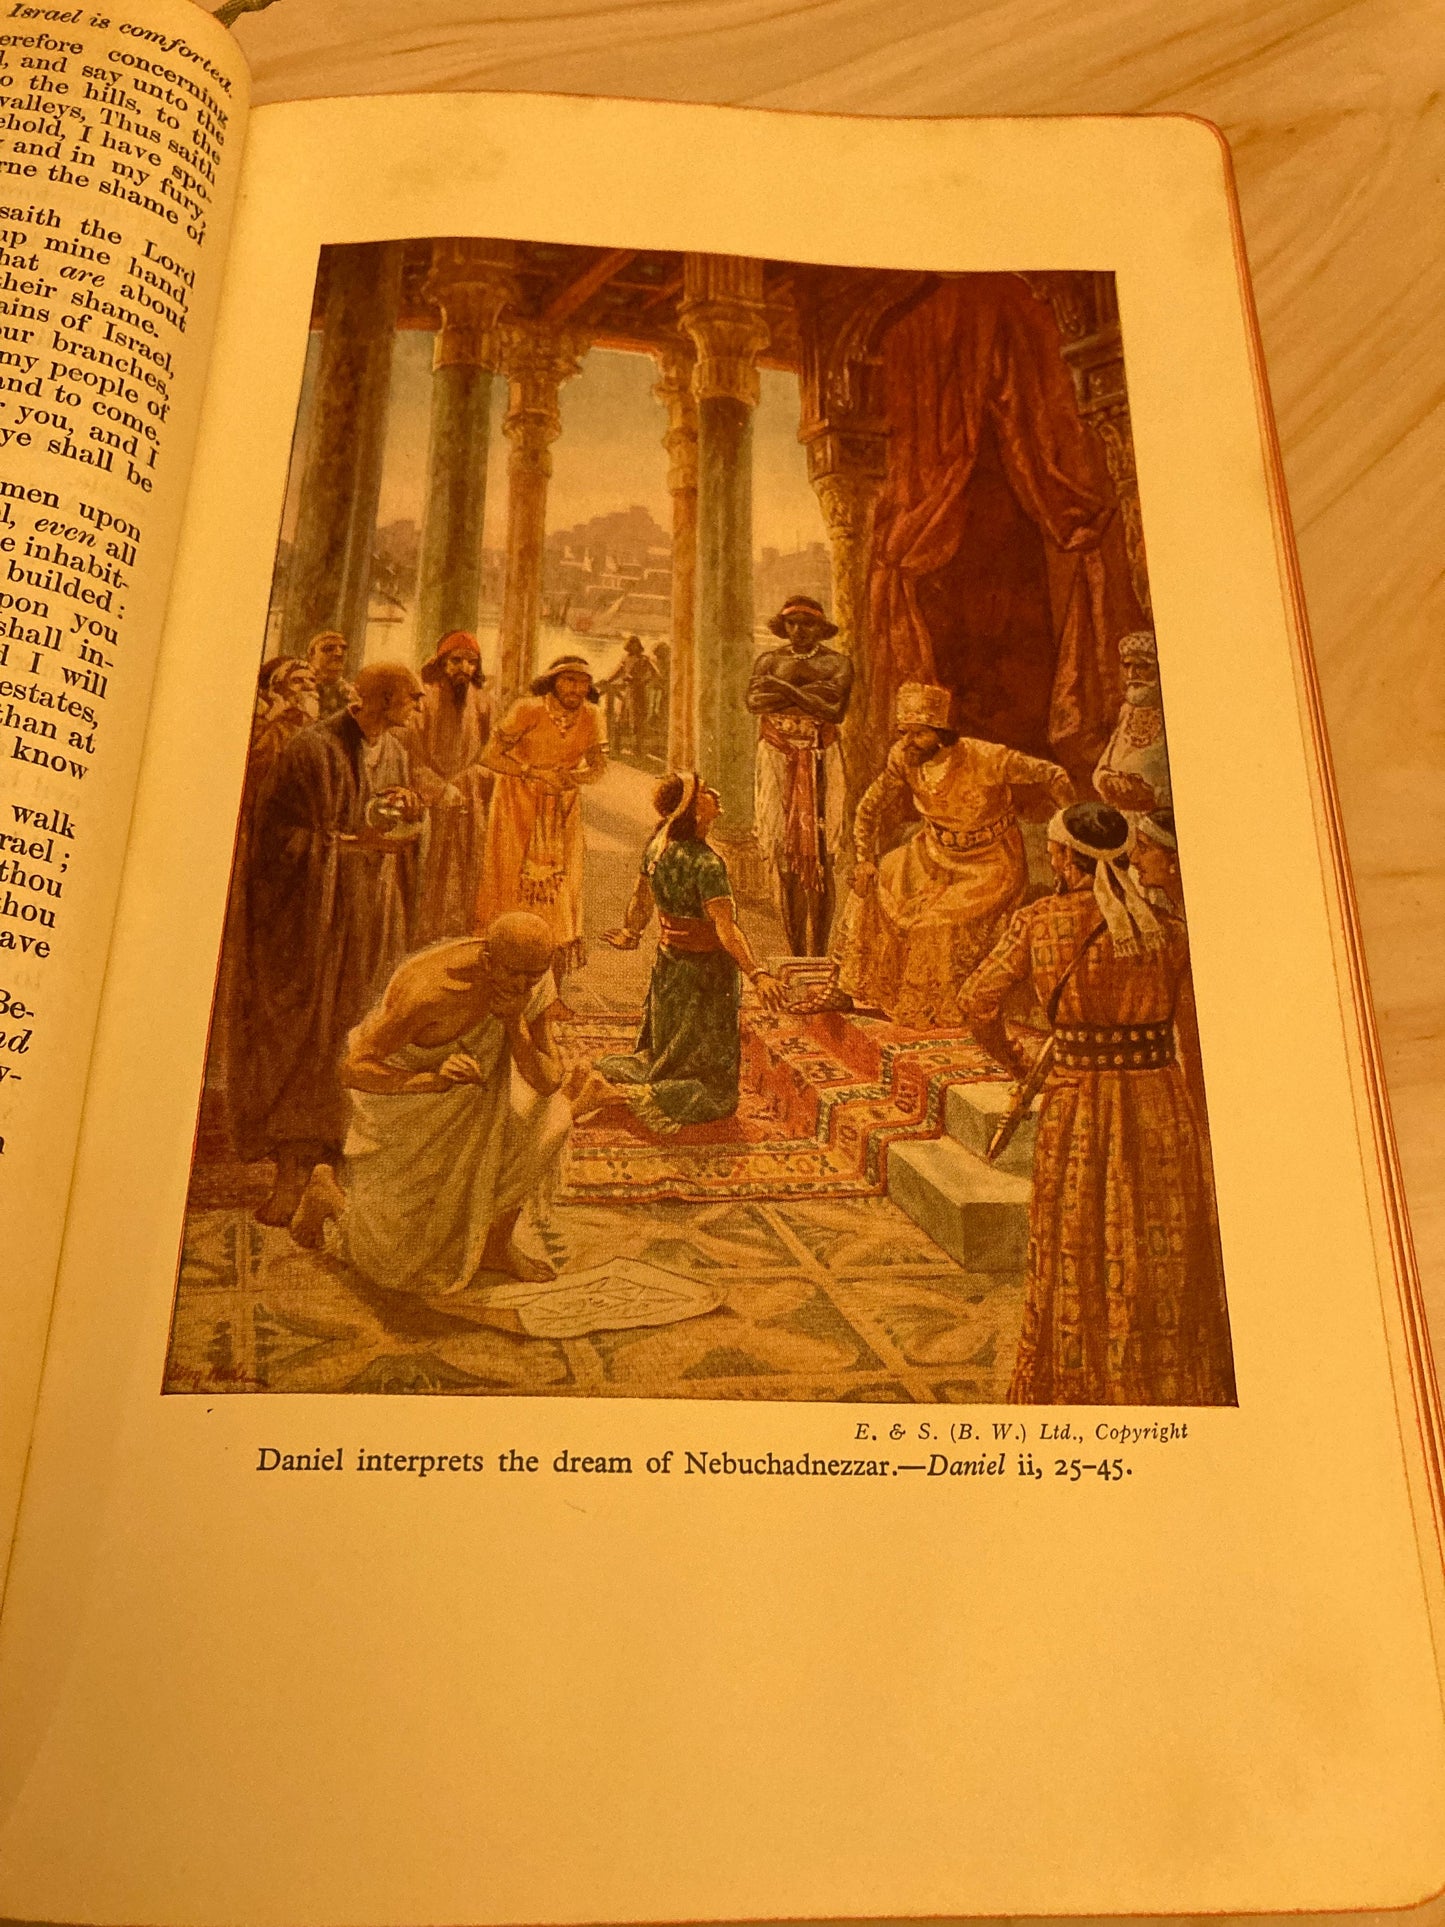 Large Vintage Illustrated Holy Bible 1937 - (Ref x187)